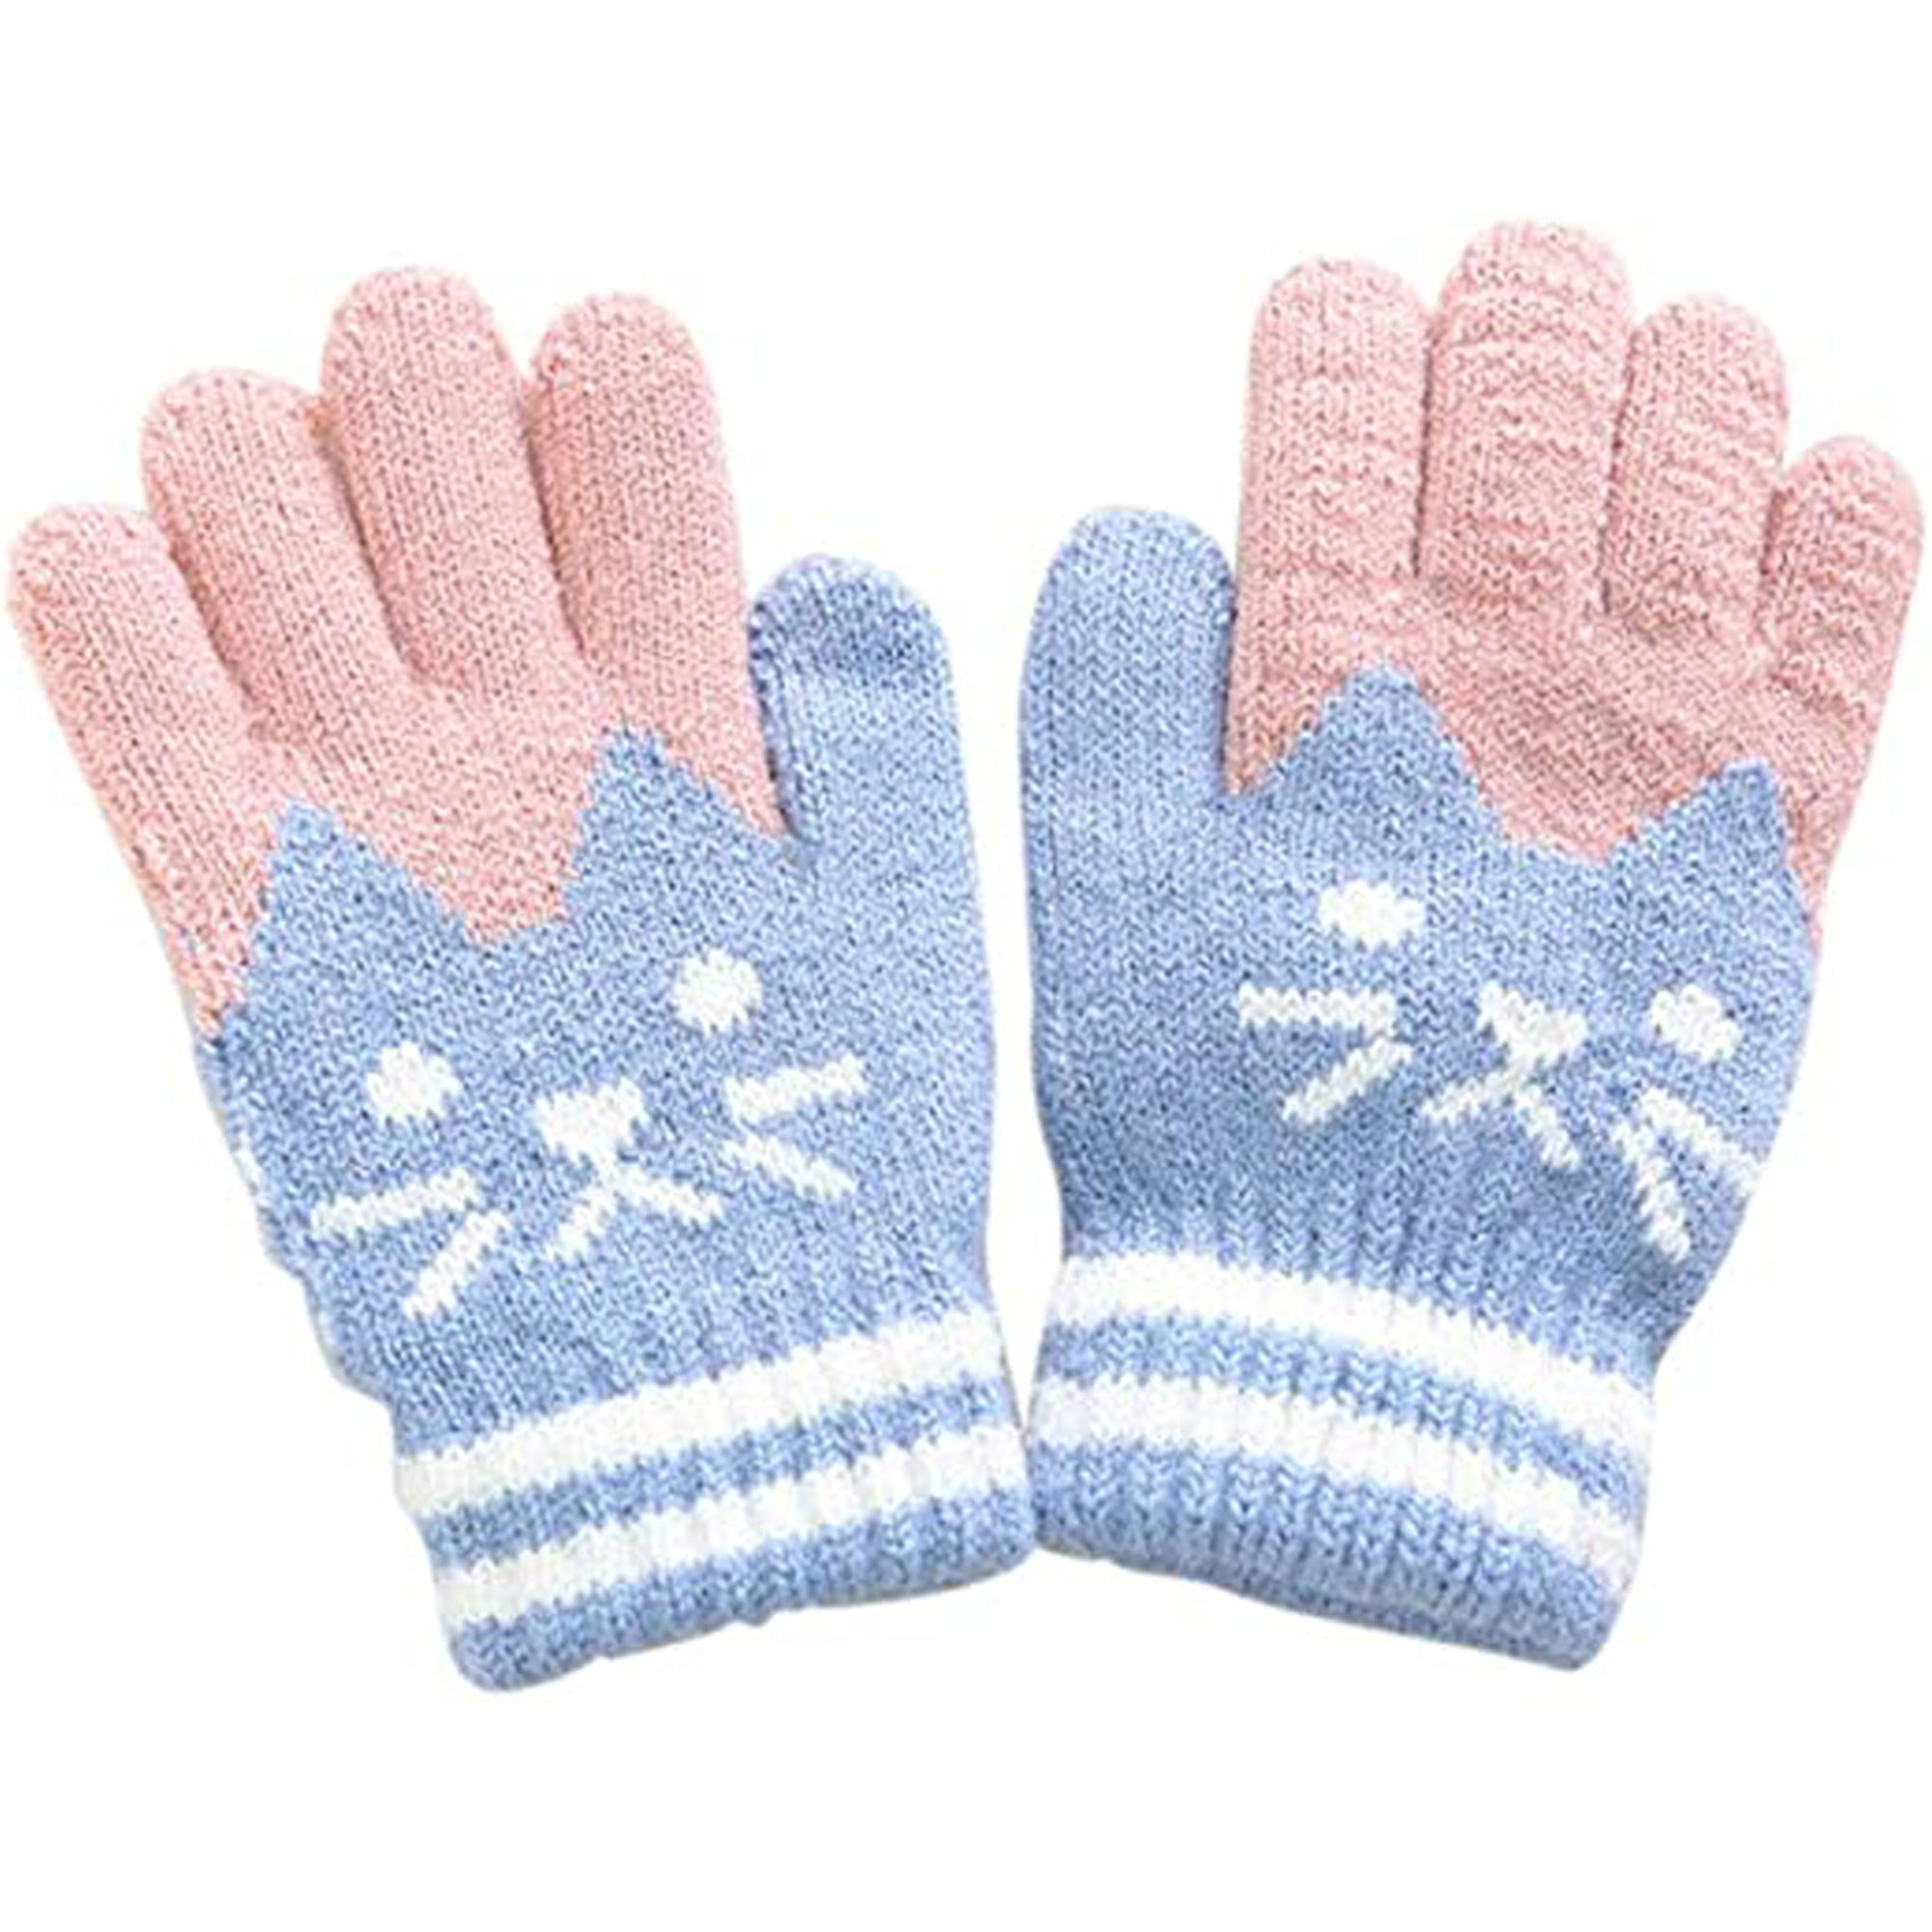 Cartoon Full Finger Fluffy Skiing Mittens Soft Chunky Thermal Mitten Winter Warm Knitted Hand Warmer Christmas Gift for 2-6 Years Kids Fleece Lining Winter Warm Insulated Gloves